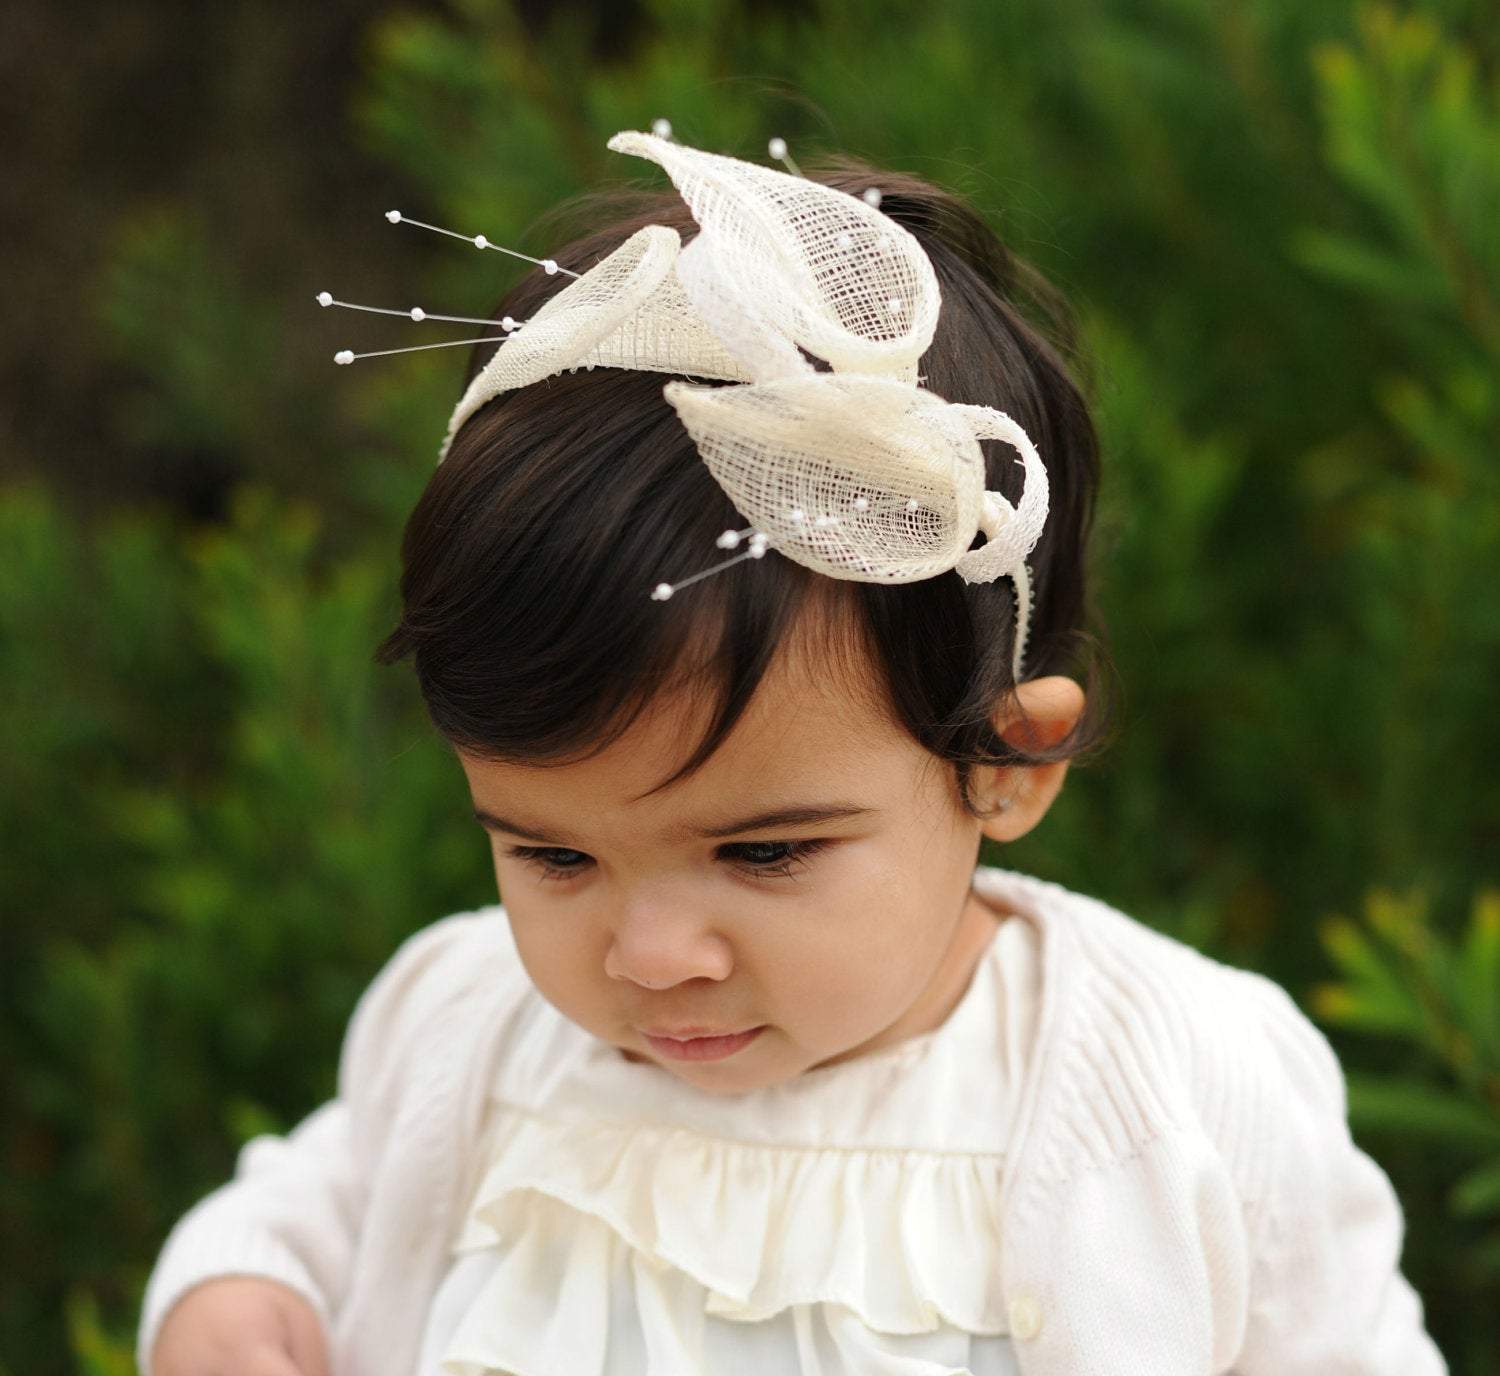 Women , girls Ivory Bridal, Bridesmaids, Wedding or any other special occasion headband - Fascinator, hair accessory